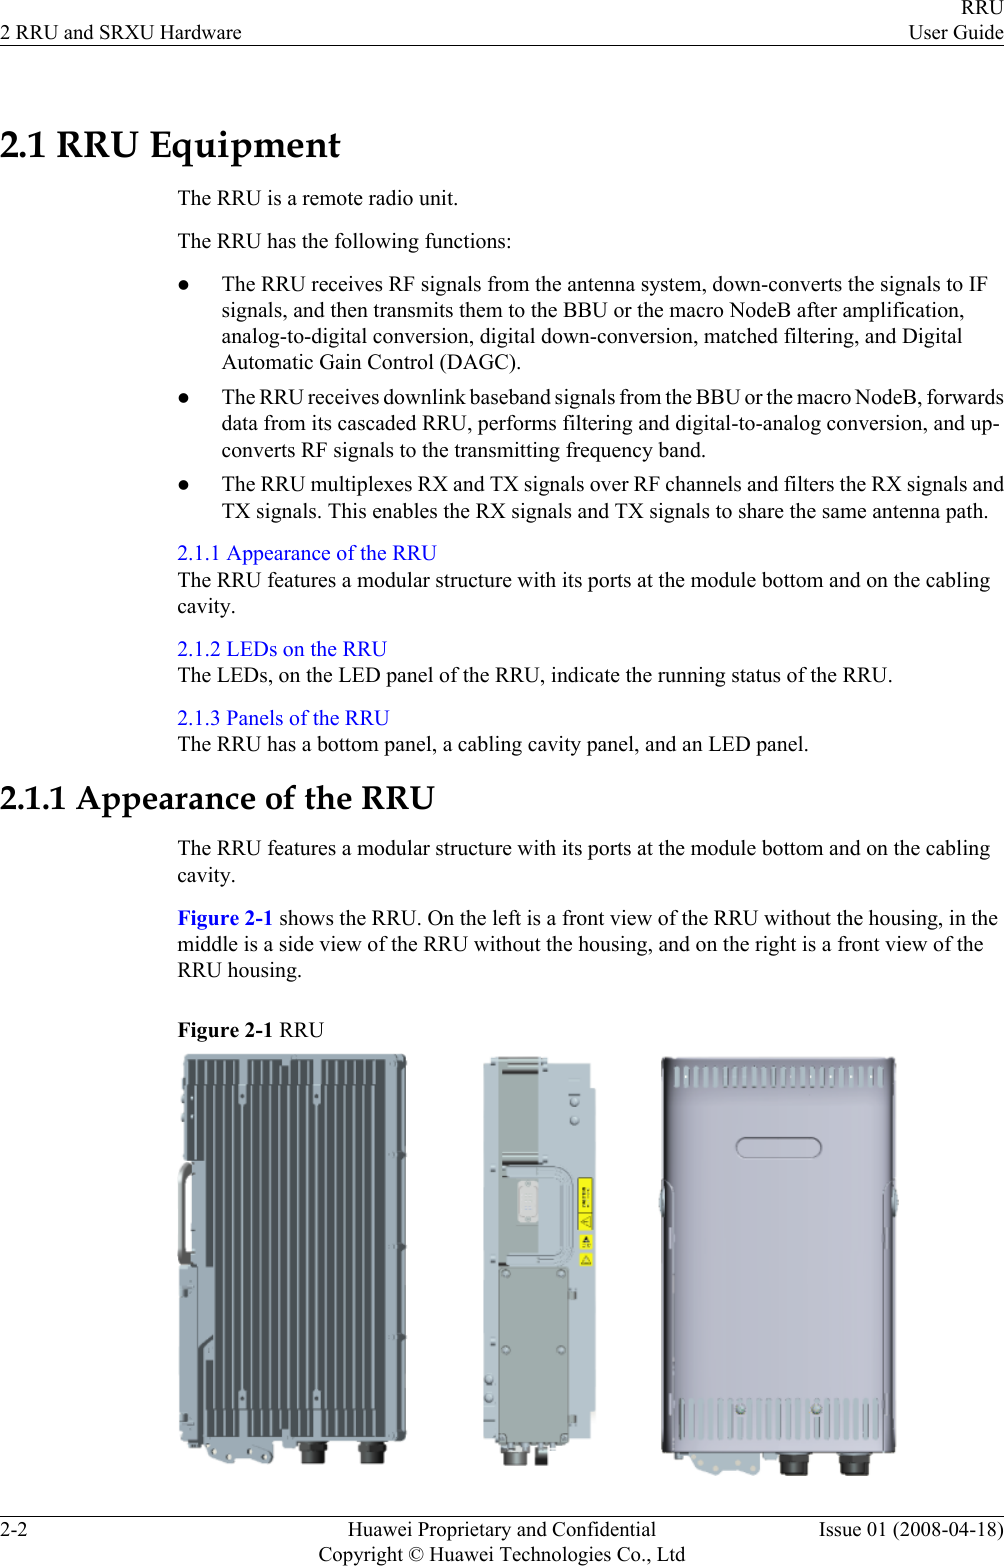 2.1 RRU EquipmentThe RRU is a remote radio unit.The RRU has the following functions:lThe RRU receives RF signals from the antenna system, down-converts the signals to IFsignals, and then transmits them to the BBU or the macro NodeB after amplification,analog-to-digital conversion, digital down-conversion, matched filtering, and DigitalAutomatic Gain Control (DAGC).lThe RRU receives downlink baseband signals from the BBU or the macro NodeB, forwardsdata from its cascaded RRU, performs filtering and digital-to-analog conversion, and up-converts RF signals to the transmitting frequency band.lThe RRU multiplexes RX and TX signals over RF channels and filters the RX signals andTX signals. This enables the RX signals and TX signals to share the same antenna path.2.1.1 Appearance of the RRUThe RRU features a modular structure with its ports at the module bottom and on the cablingcavity.2.1.2 LEDs on the RRUThe LEDs, on the LED panel of the RRU, indicate the running status of the RRU.2.1.3 Panels of the RRUThe RRU has a bottom panel, a cabling cavity panel, and an LED panel.2.1.1 Appearance of the RRUThe RRU features a modular structure with its ports at the module bottom and on the cablingcavity.Figure 2-1 shows the RRU. On the left is a front view of the RRU without the housing, in themiddle is a side view of the RRU without the housing, and on the right is a front view of theRRU housing.Figure 2-1 RRU2 RRU and SRXU HardwareRRUUser Guide2-2 Huawei Proprietary and ConfidentialCopyright © Huawei Technologies Co., LtdIssue 01 (2008-04-18)